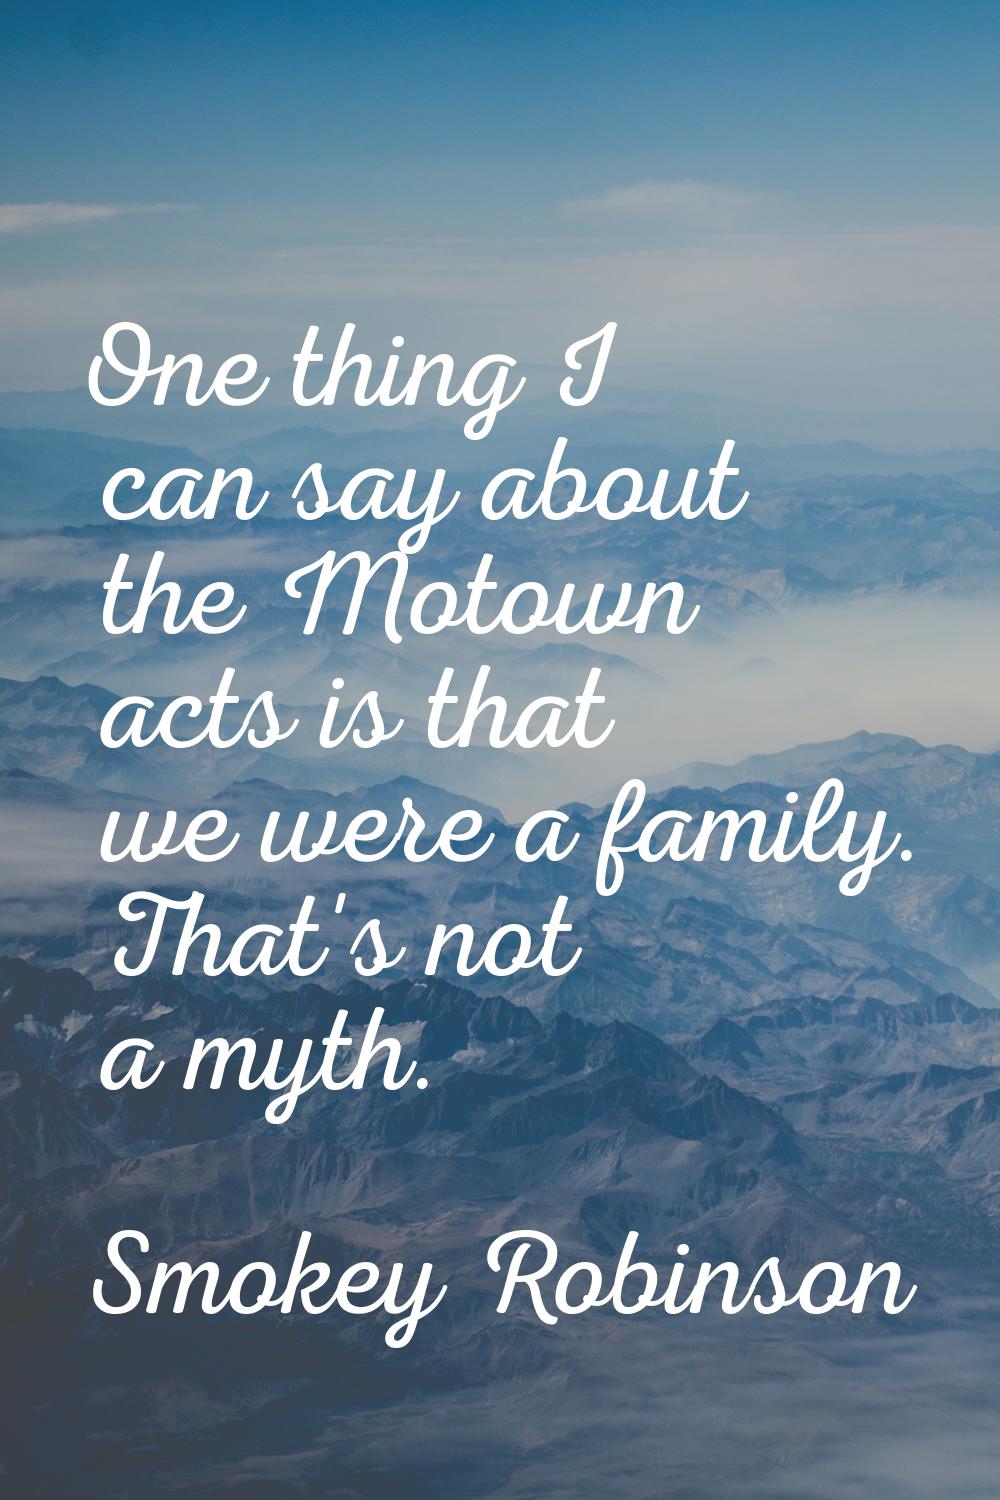 One thing I can say about the Motown acts is that we were a family. That's not a myth.